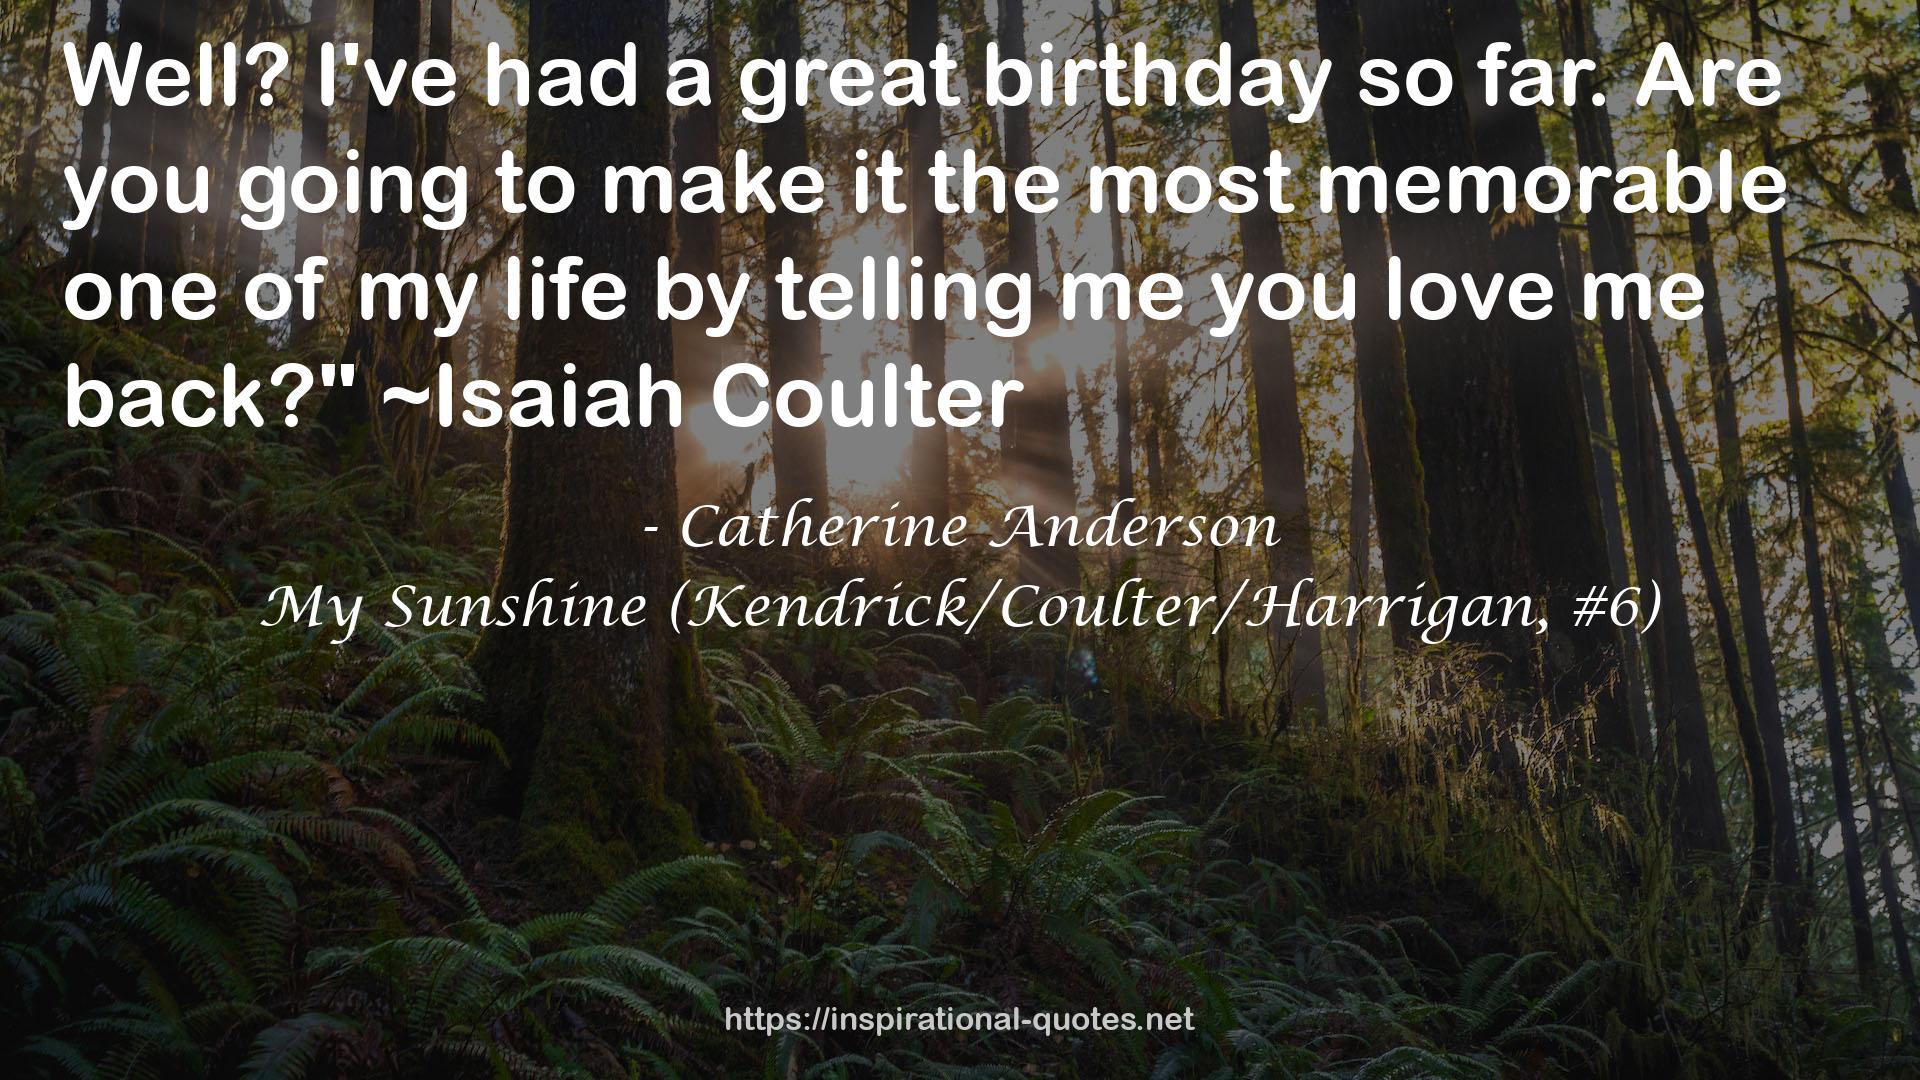 My Sunshine (Kendrick/Coulter/Harrigan, #6) QUOTES